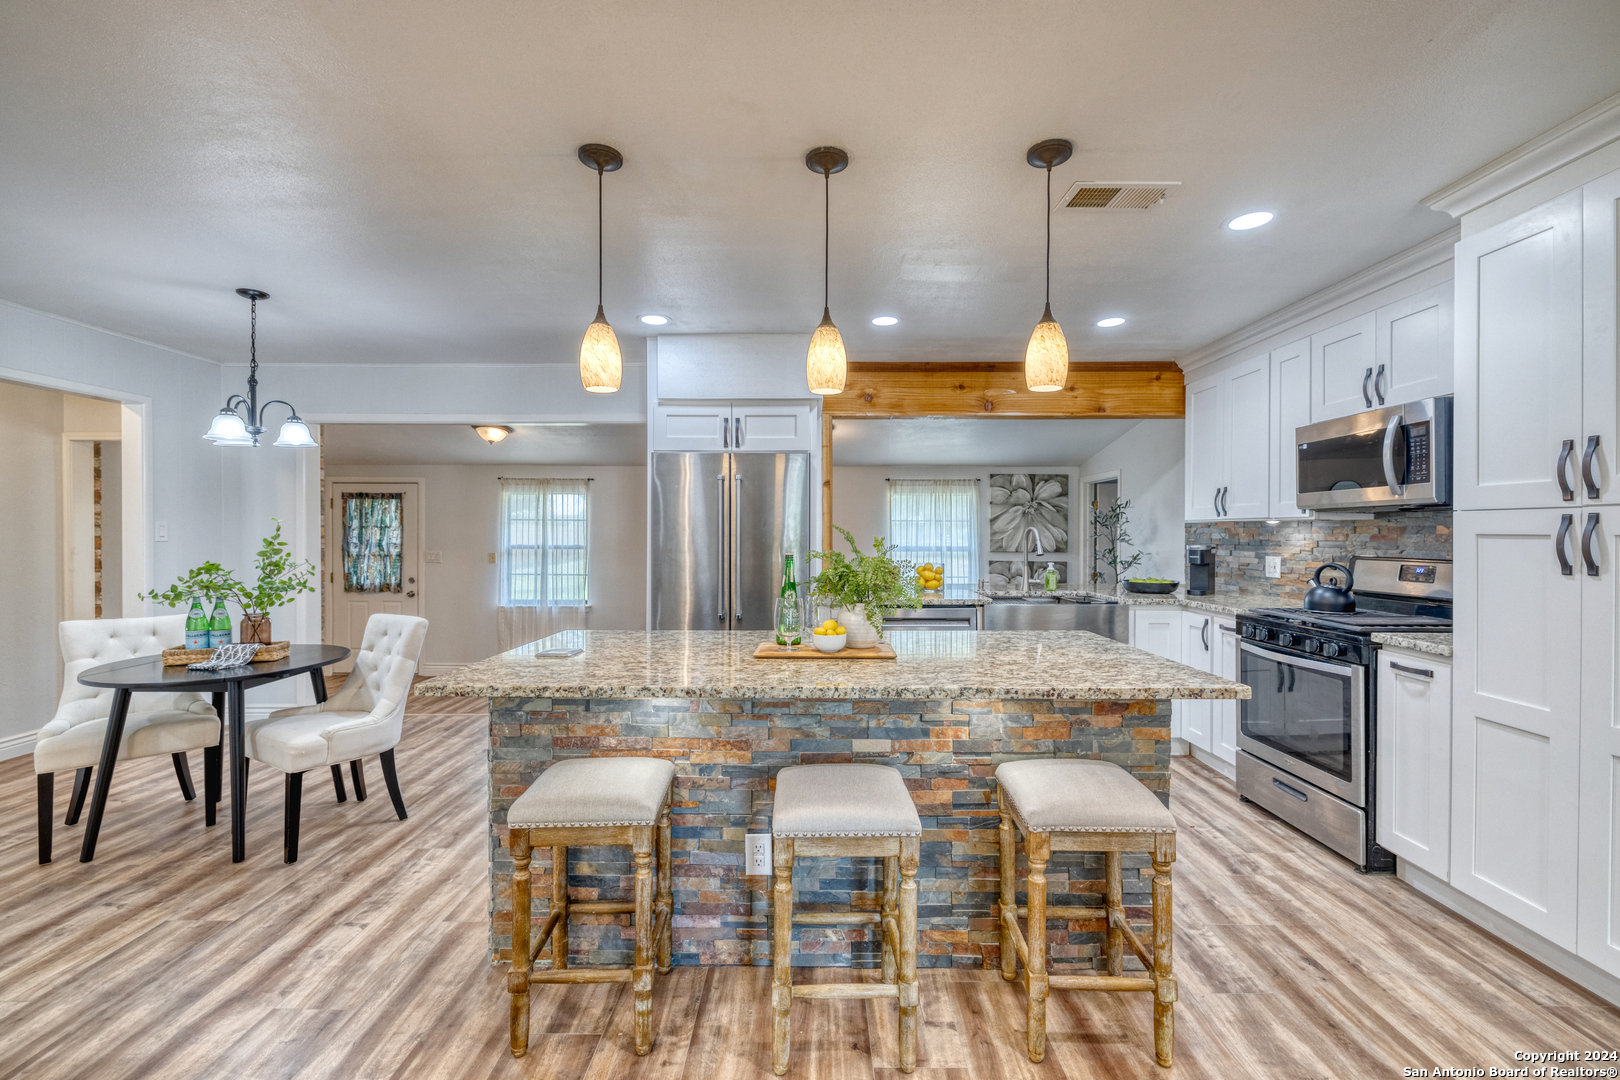 a kitchen with stainless steel appliances granite countertop a stove a refrigerator a kitchen island a dining table and chairs with wooden floor